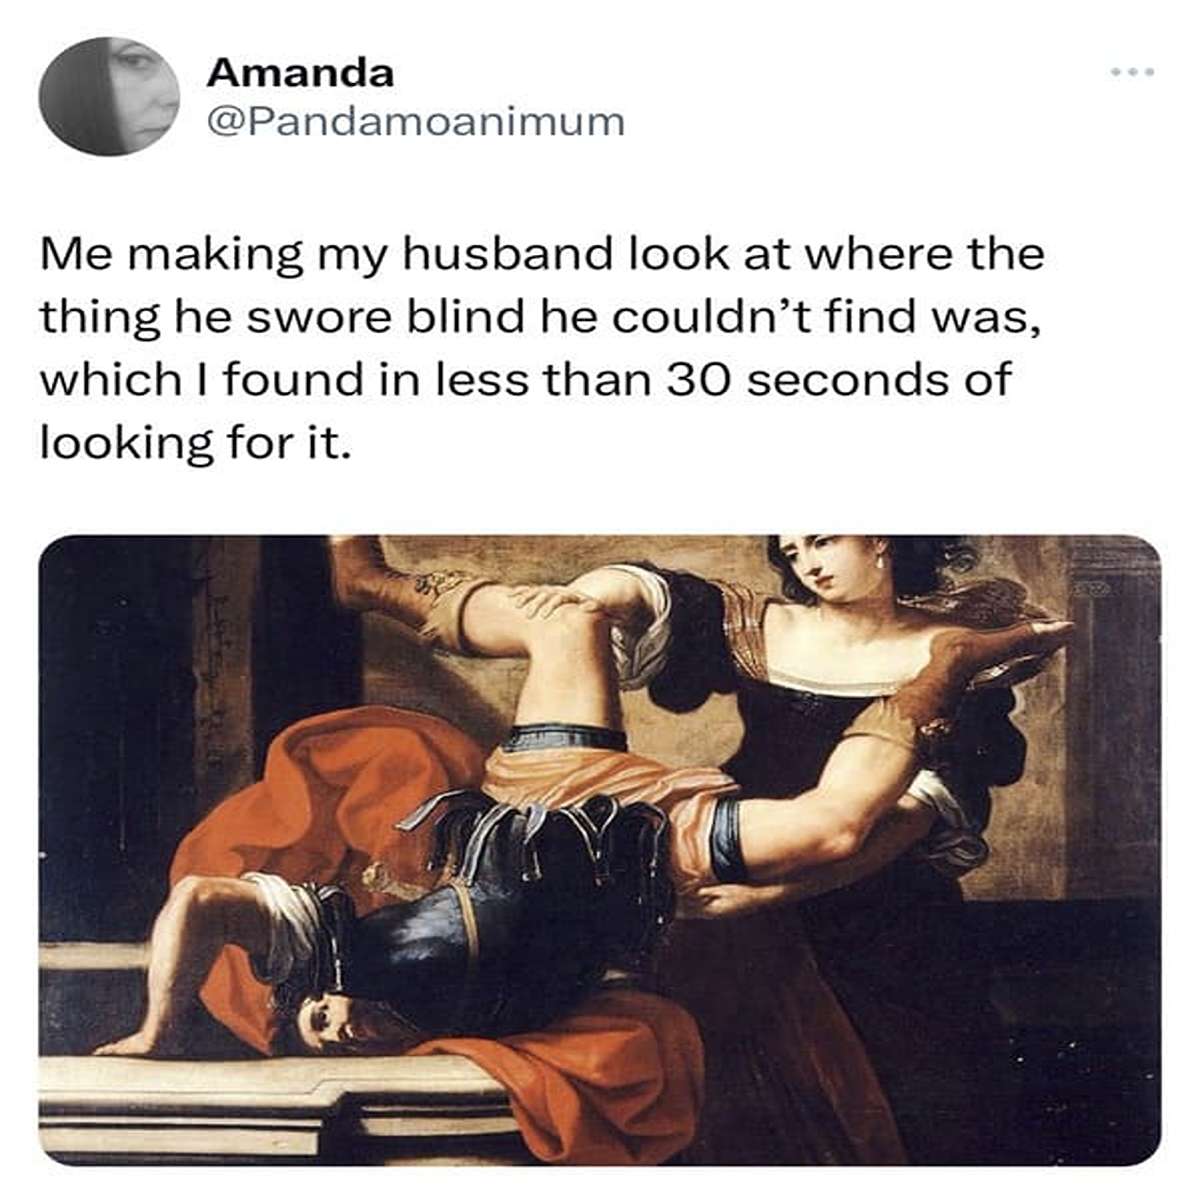 funny tweets and memes - elisabetta sirani timoclea - Amanda Me making my husband look at where the thing he swore blind he couldn't find was, which I found in less than 30 seconds of looking for it.